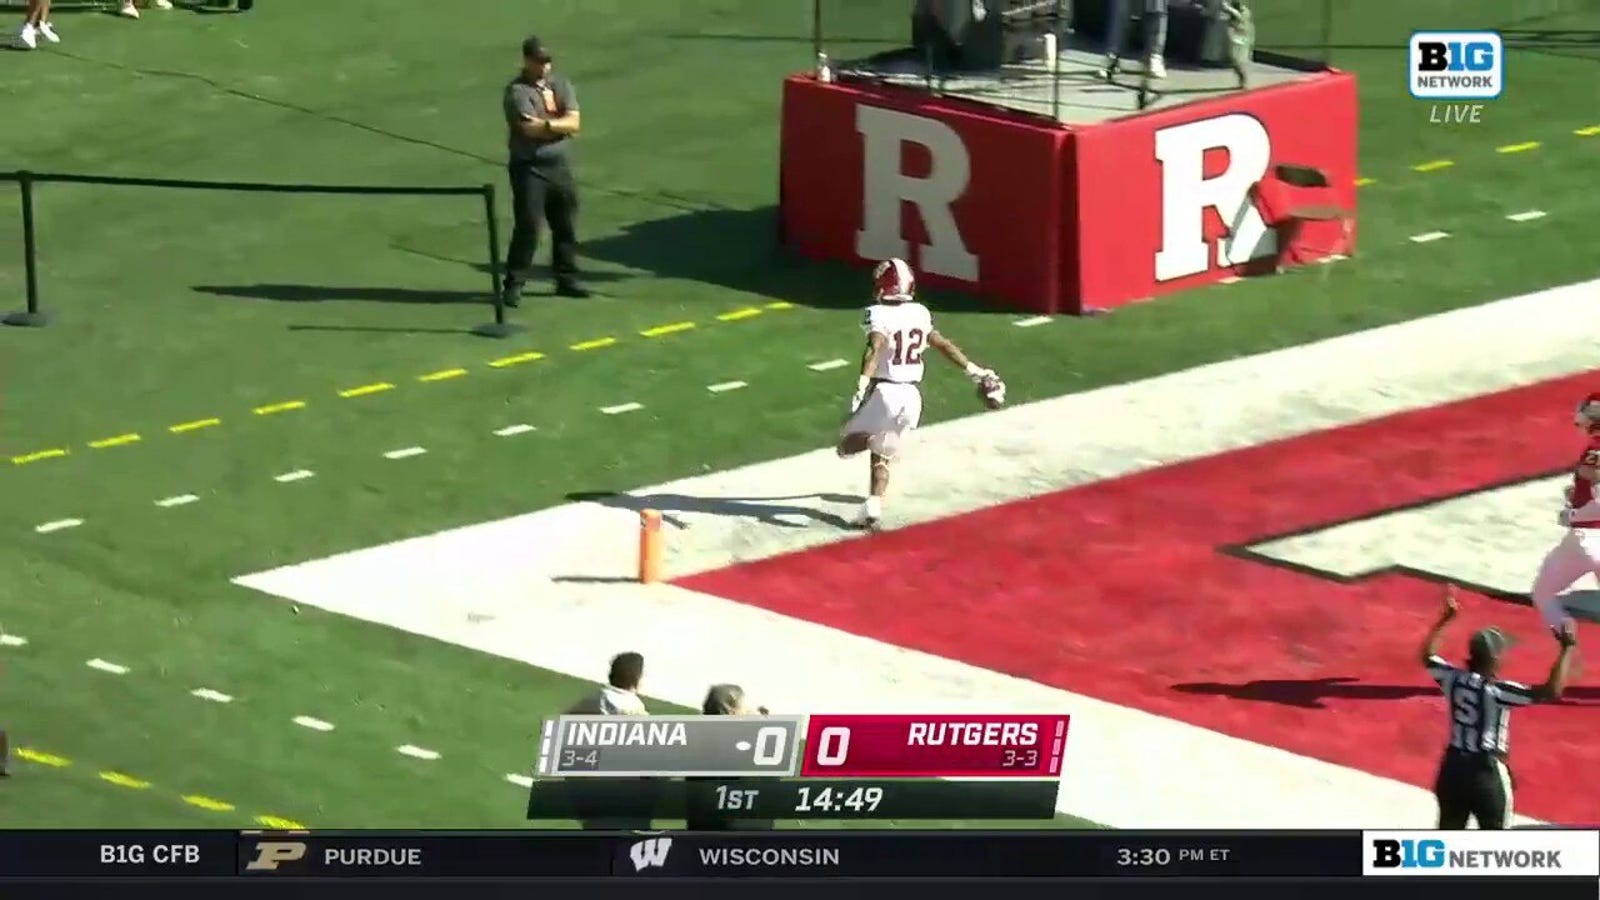 Indiana opened the game with a massive 93-yard kick back shot by Jaylene Lucas